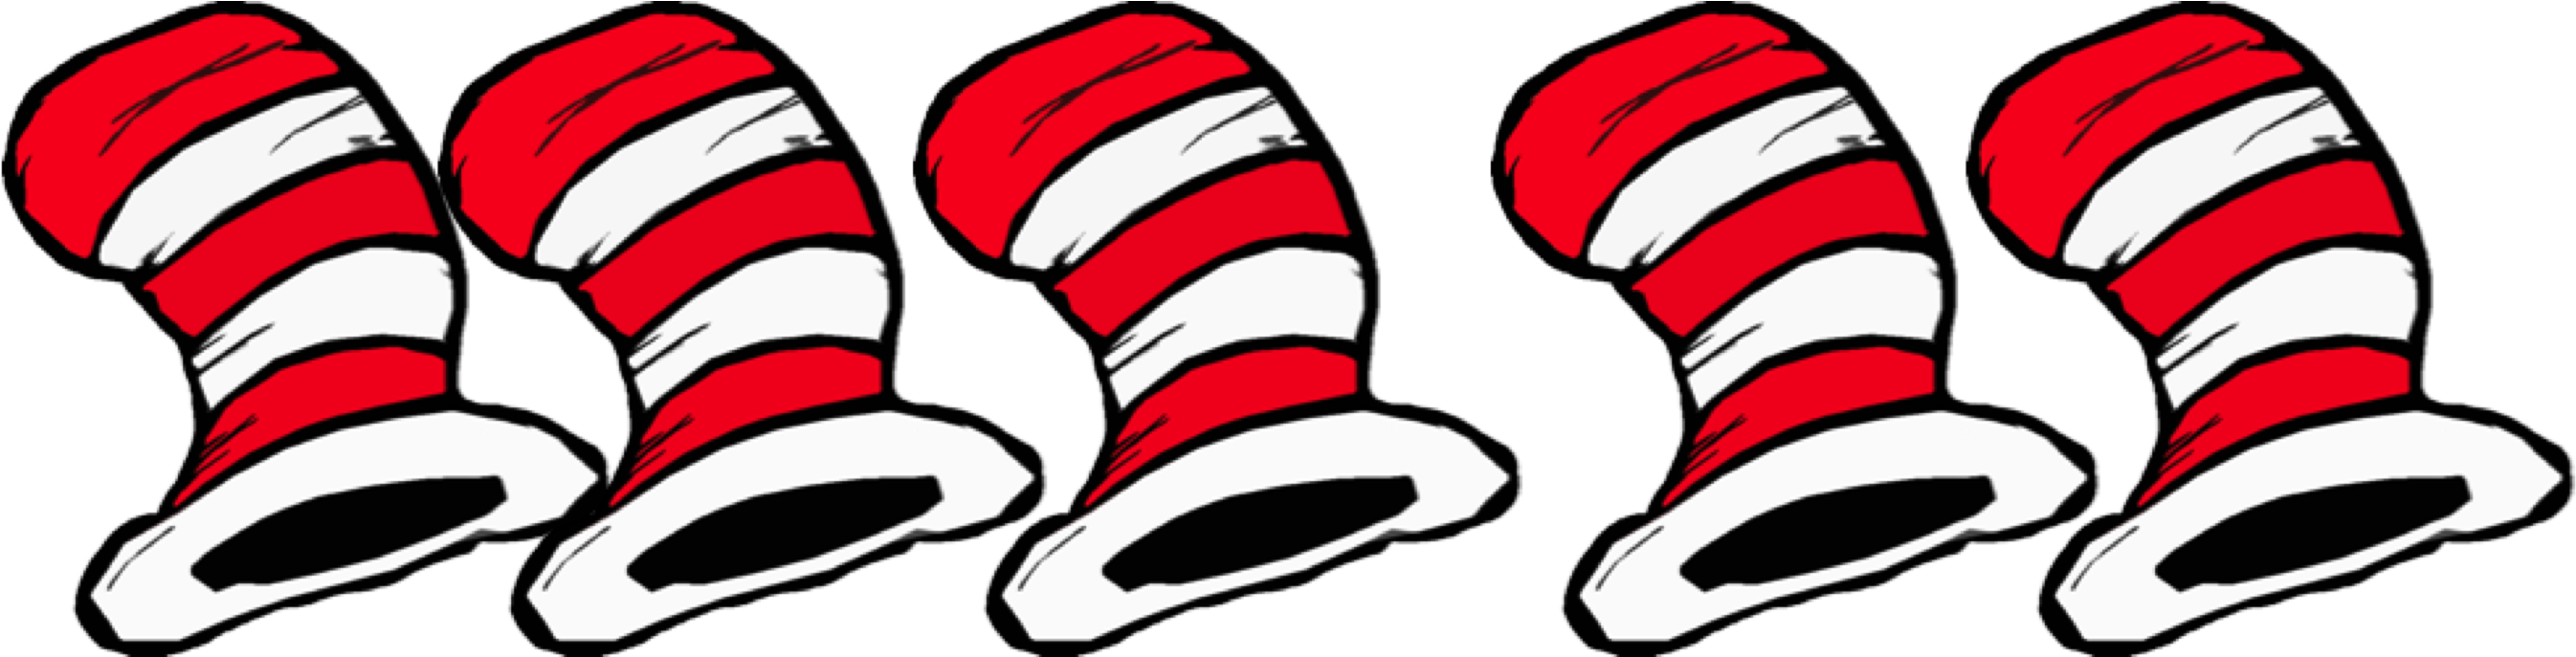 Sam, Sam, Sam I Am, Tell Me Samcraft Is Sam A Scam - Dr Seuss Hat With Numbers (2744x686)